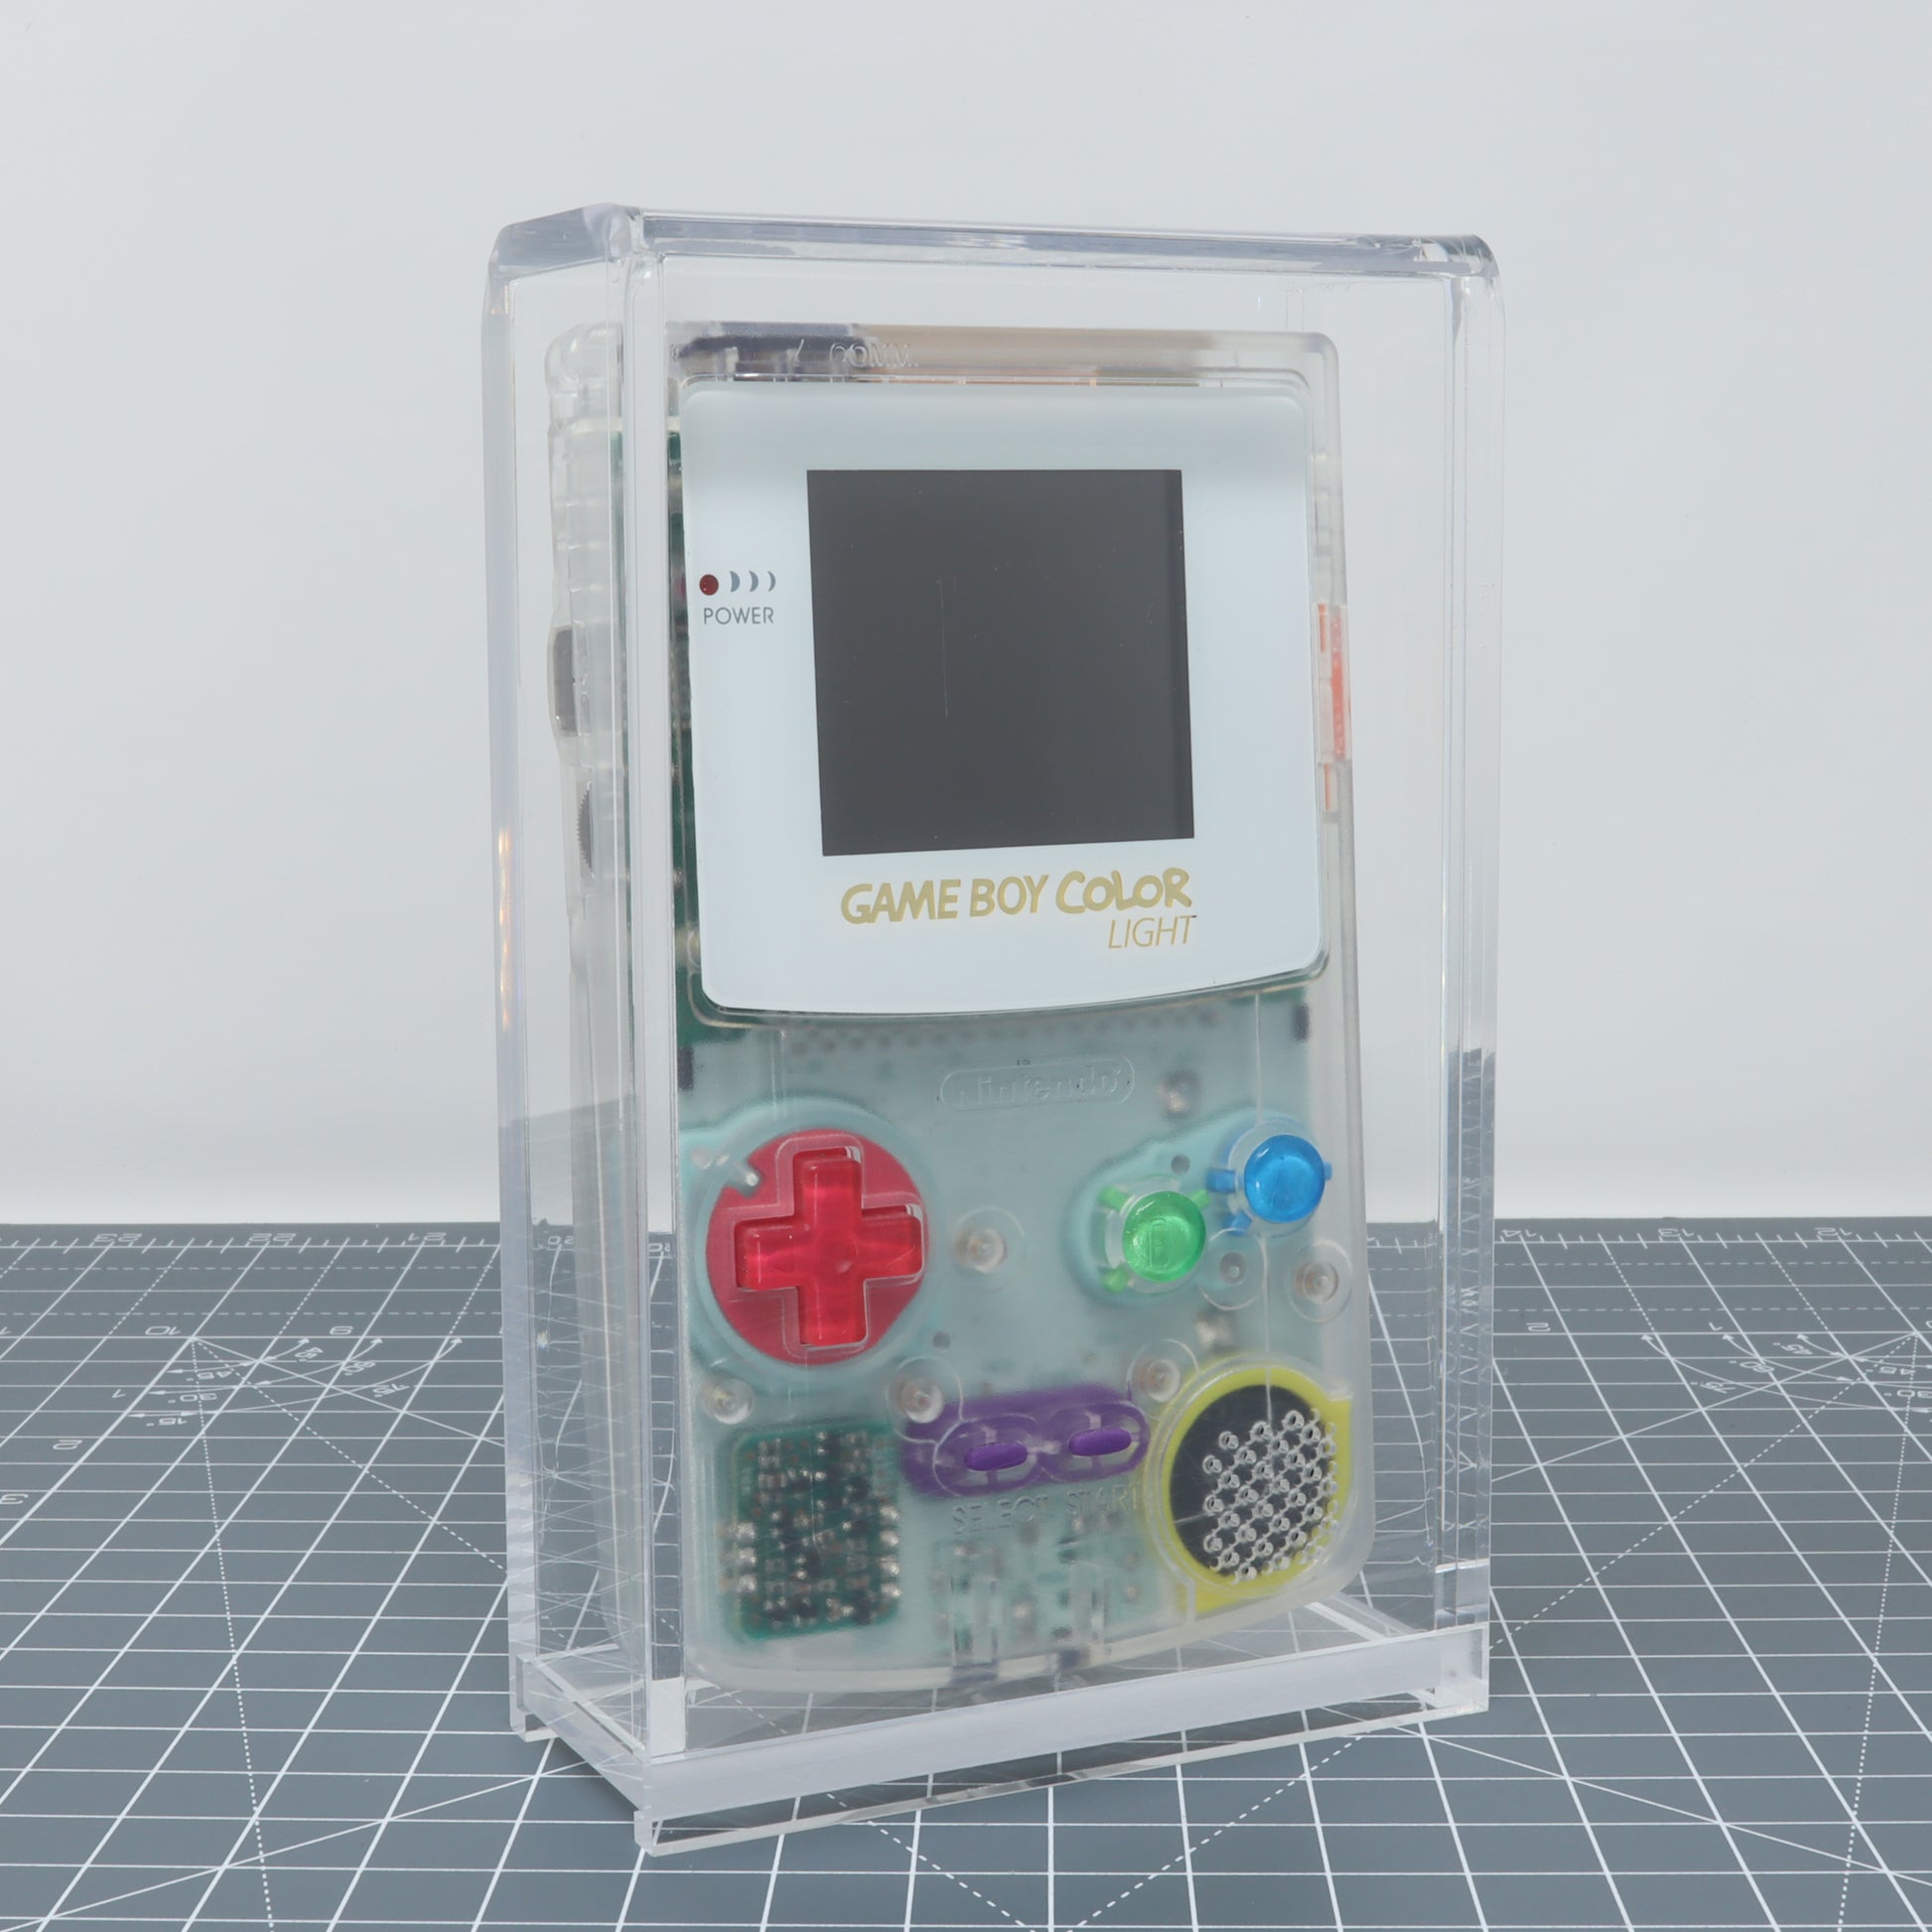 A transparent Game Boy Color displayed in a Game Boy Color - Display Capsule.